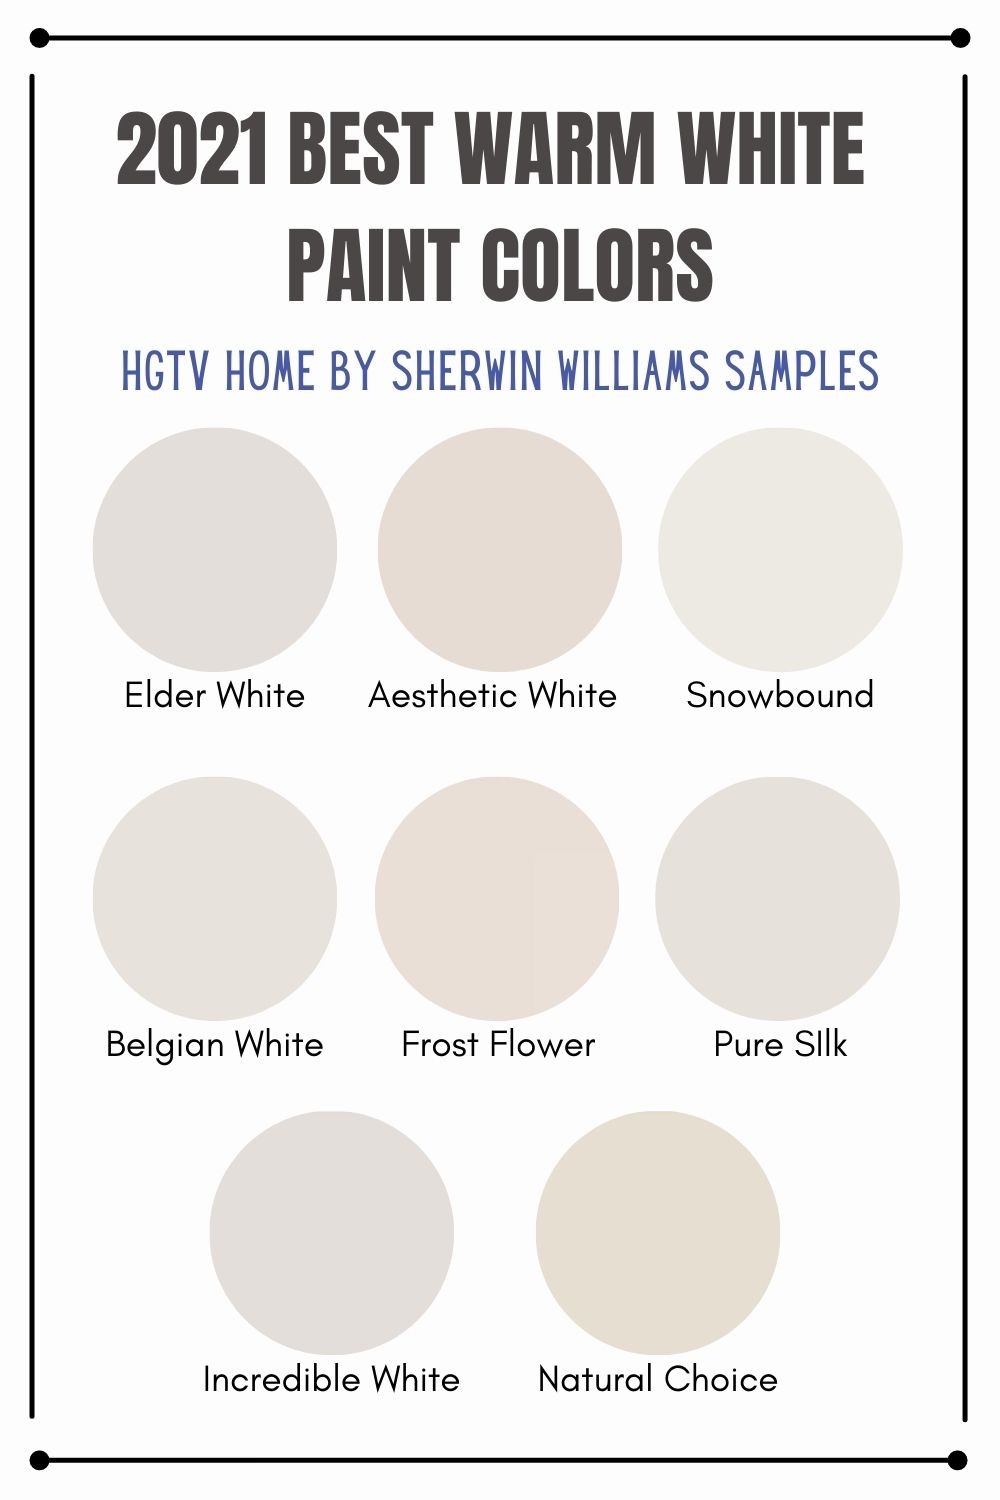 7 Best Warm White Paint Colors Designers Swear By